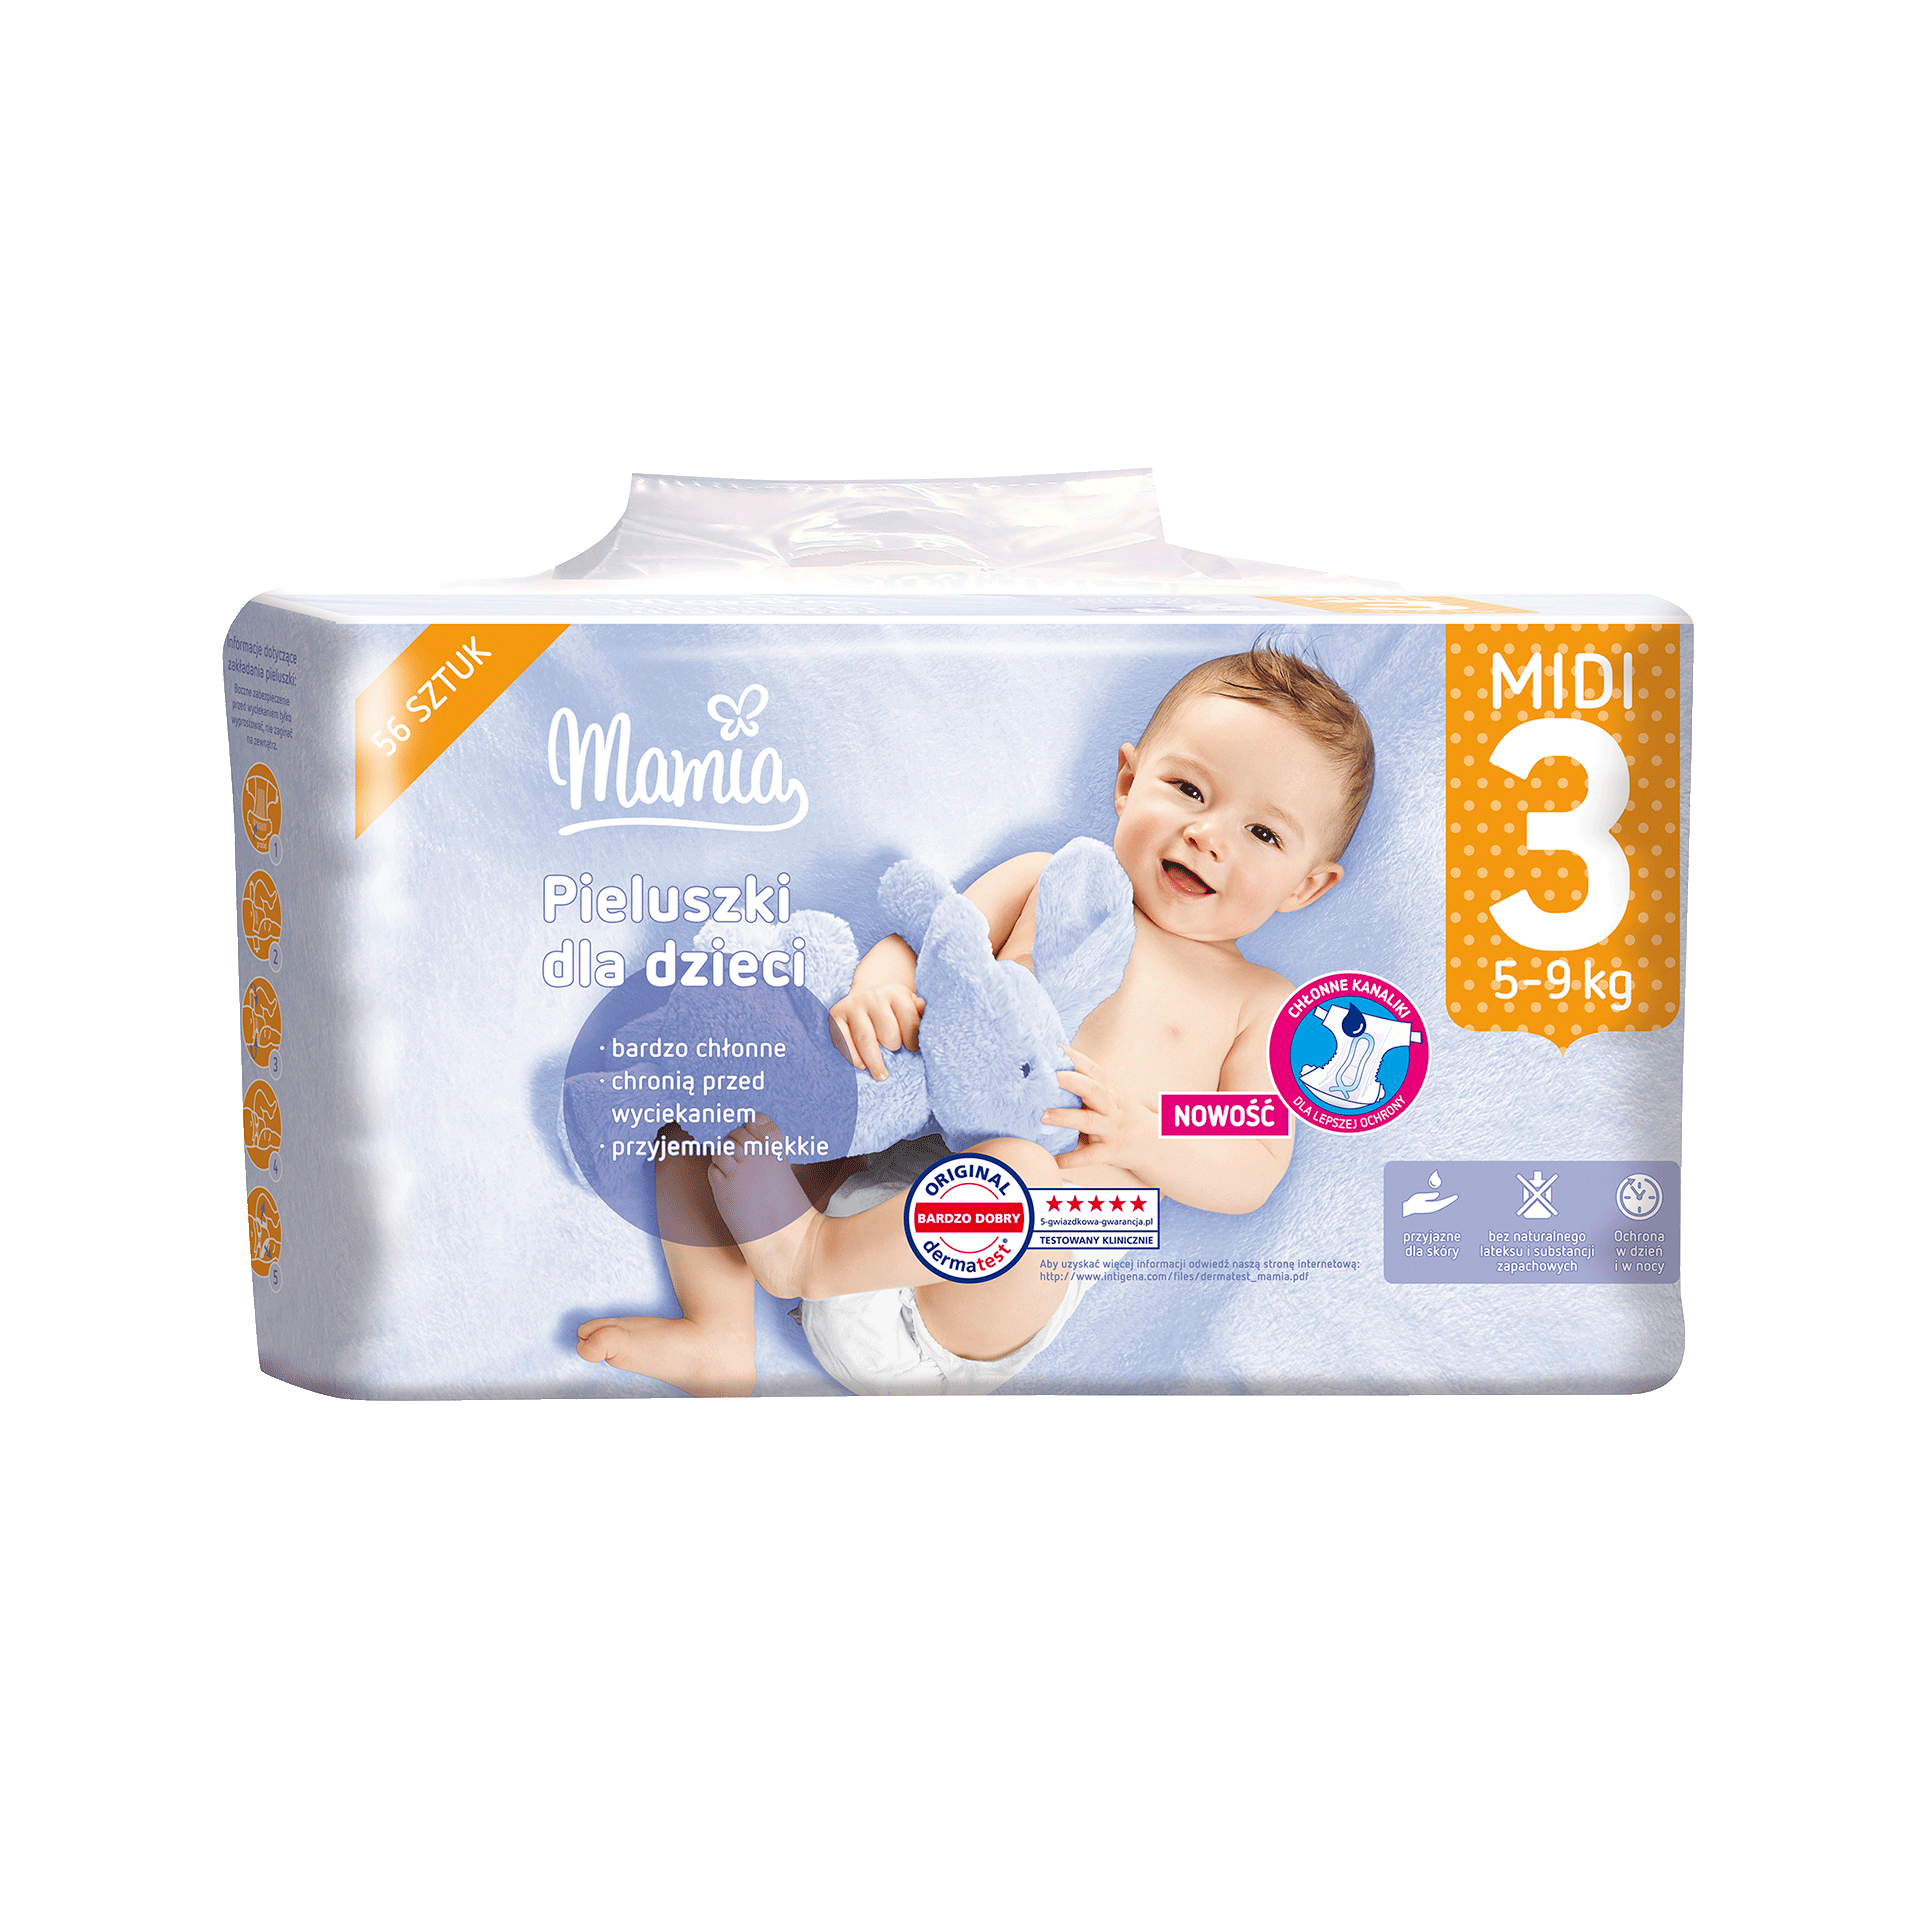 premium windeln baby soft easy fit and dry pampers